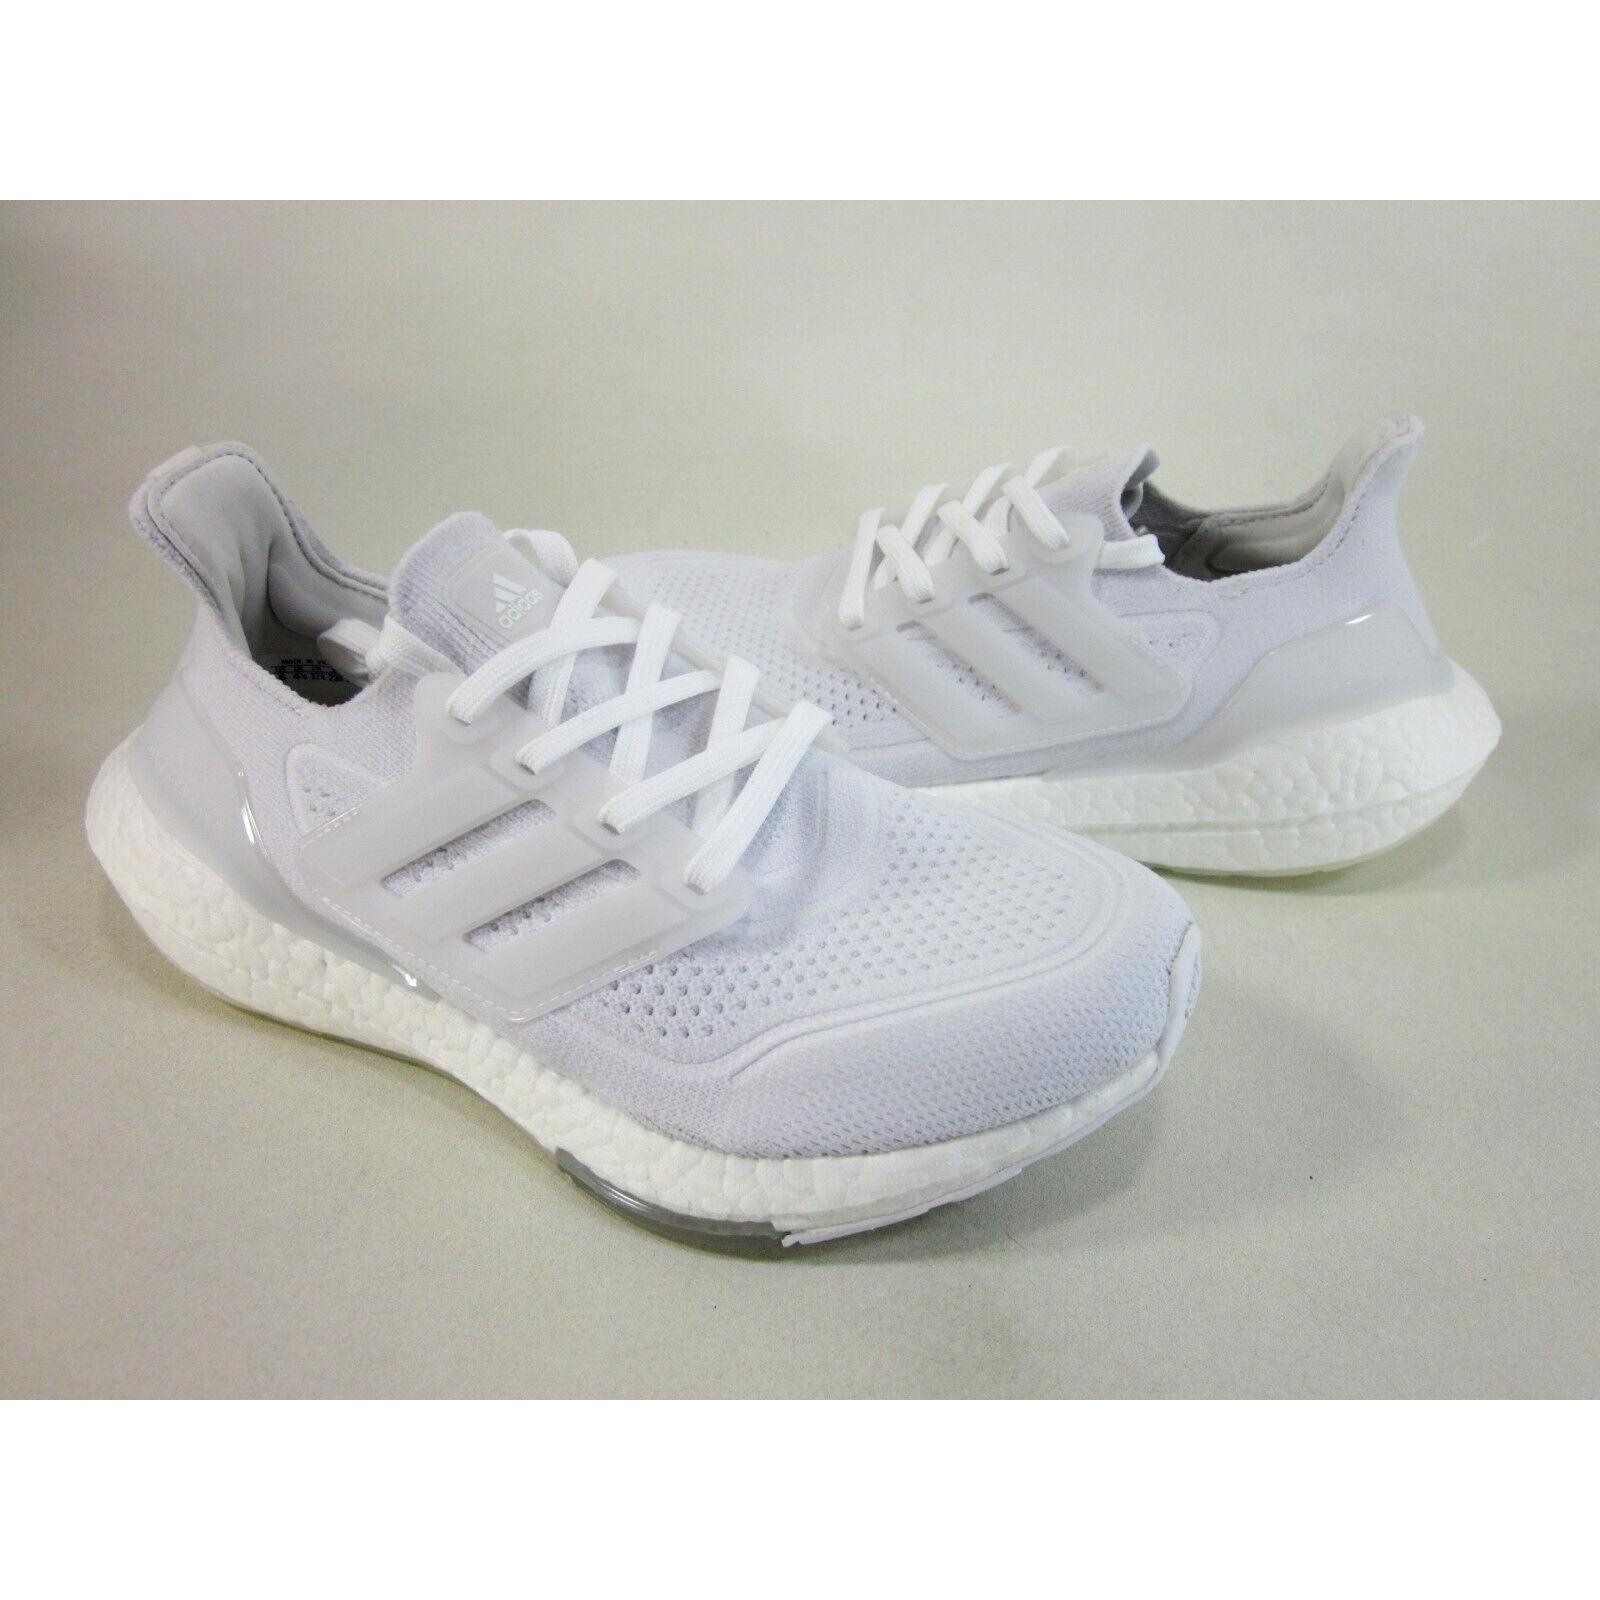 Adidas shoes Ultraboost - White/Grey 4